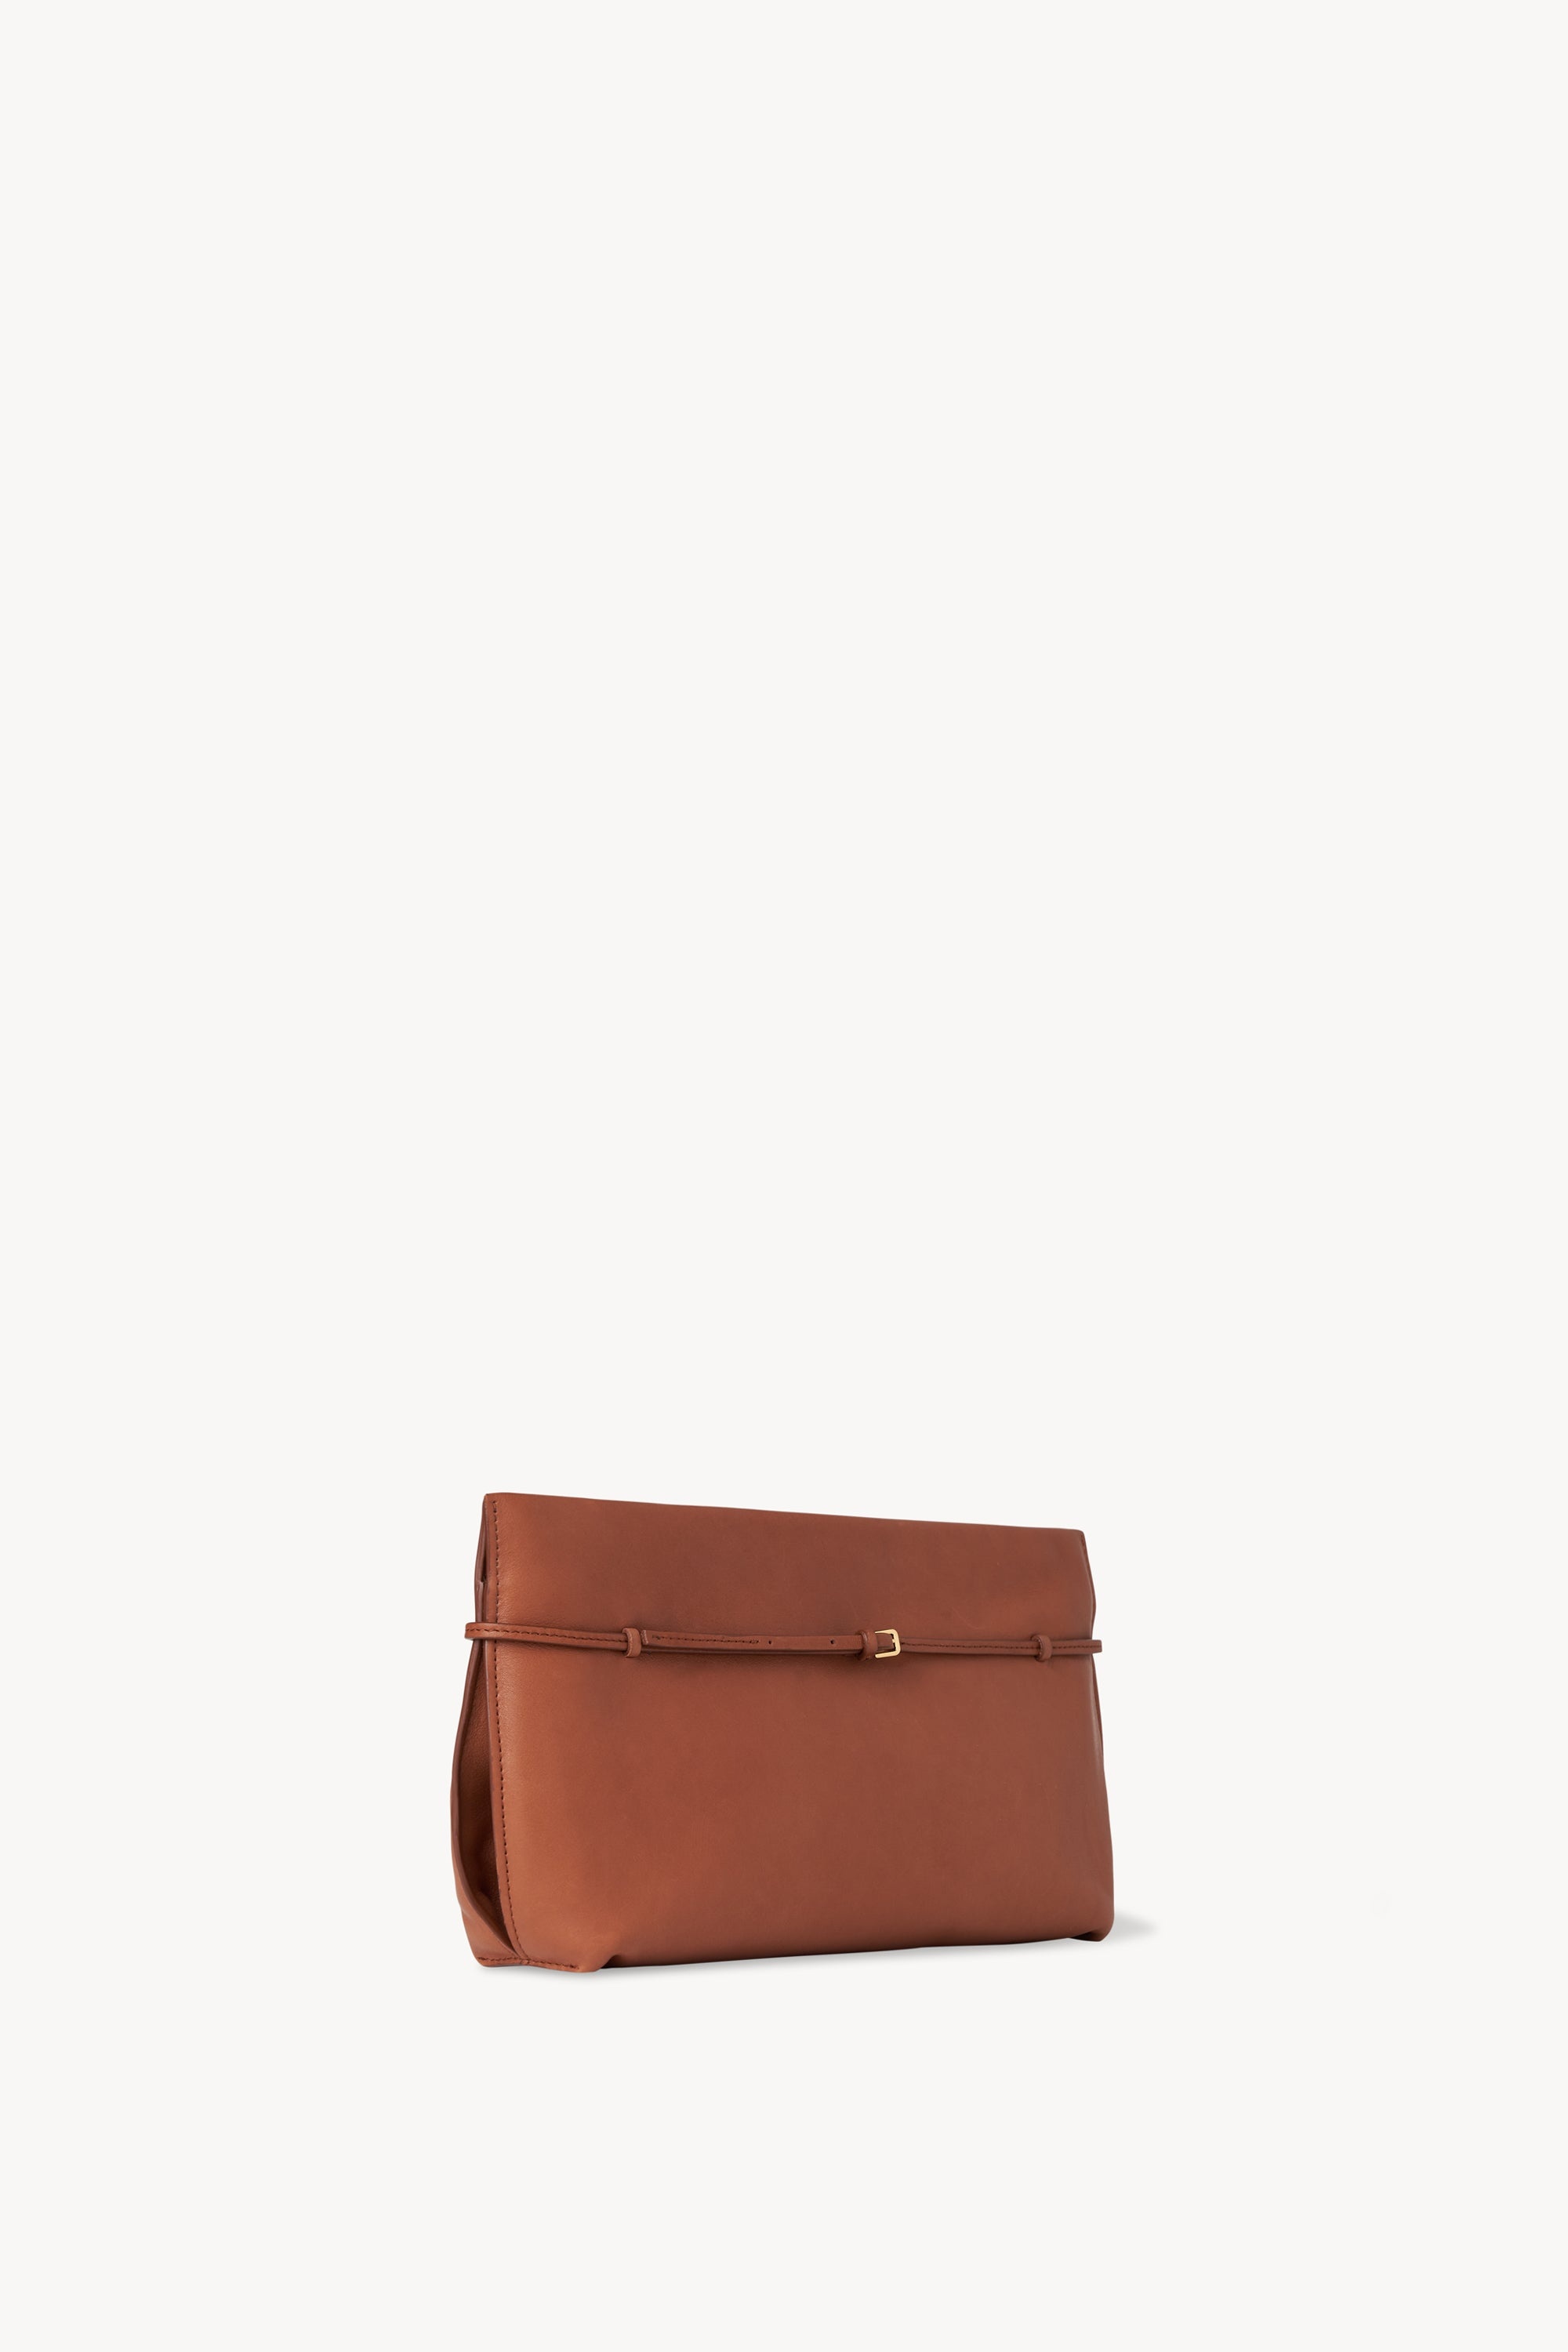 Sienna Clutch in Leather - 2